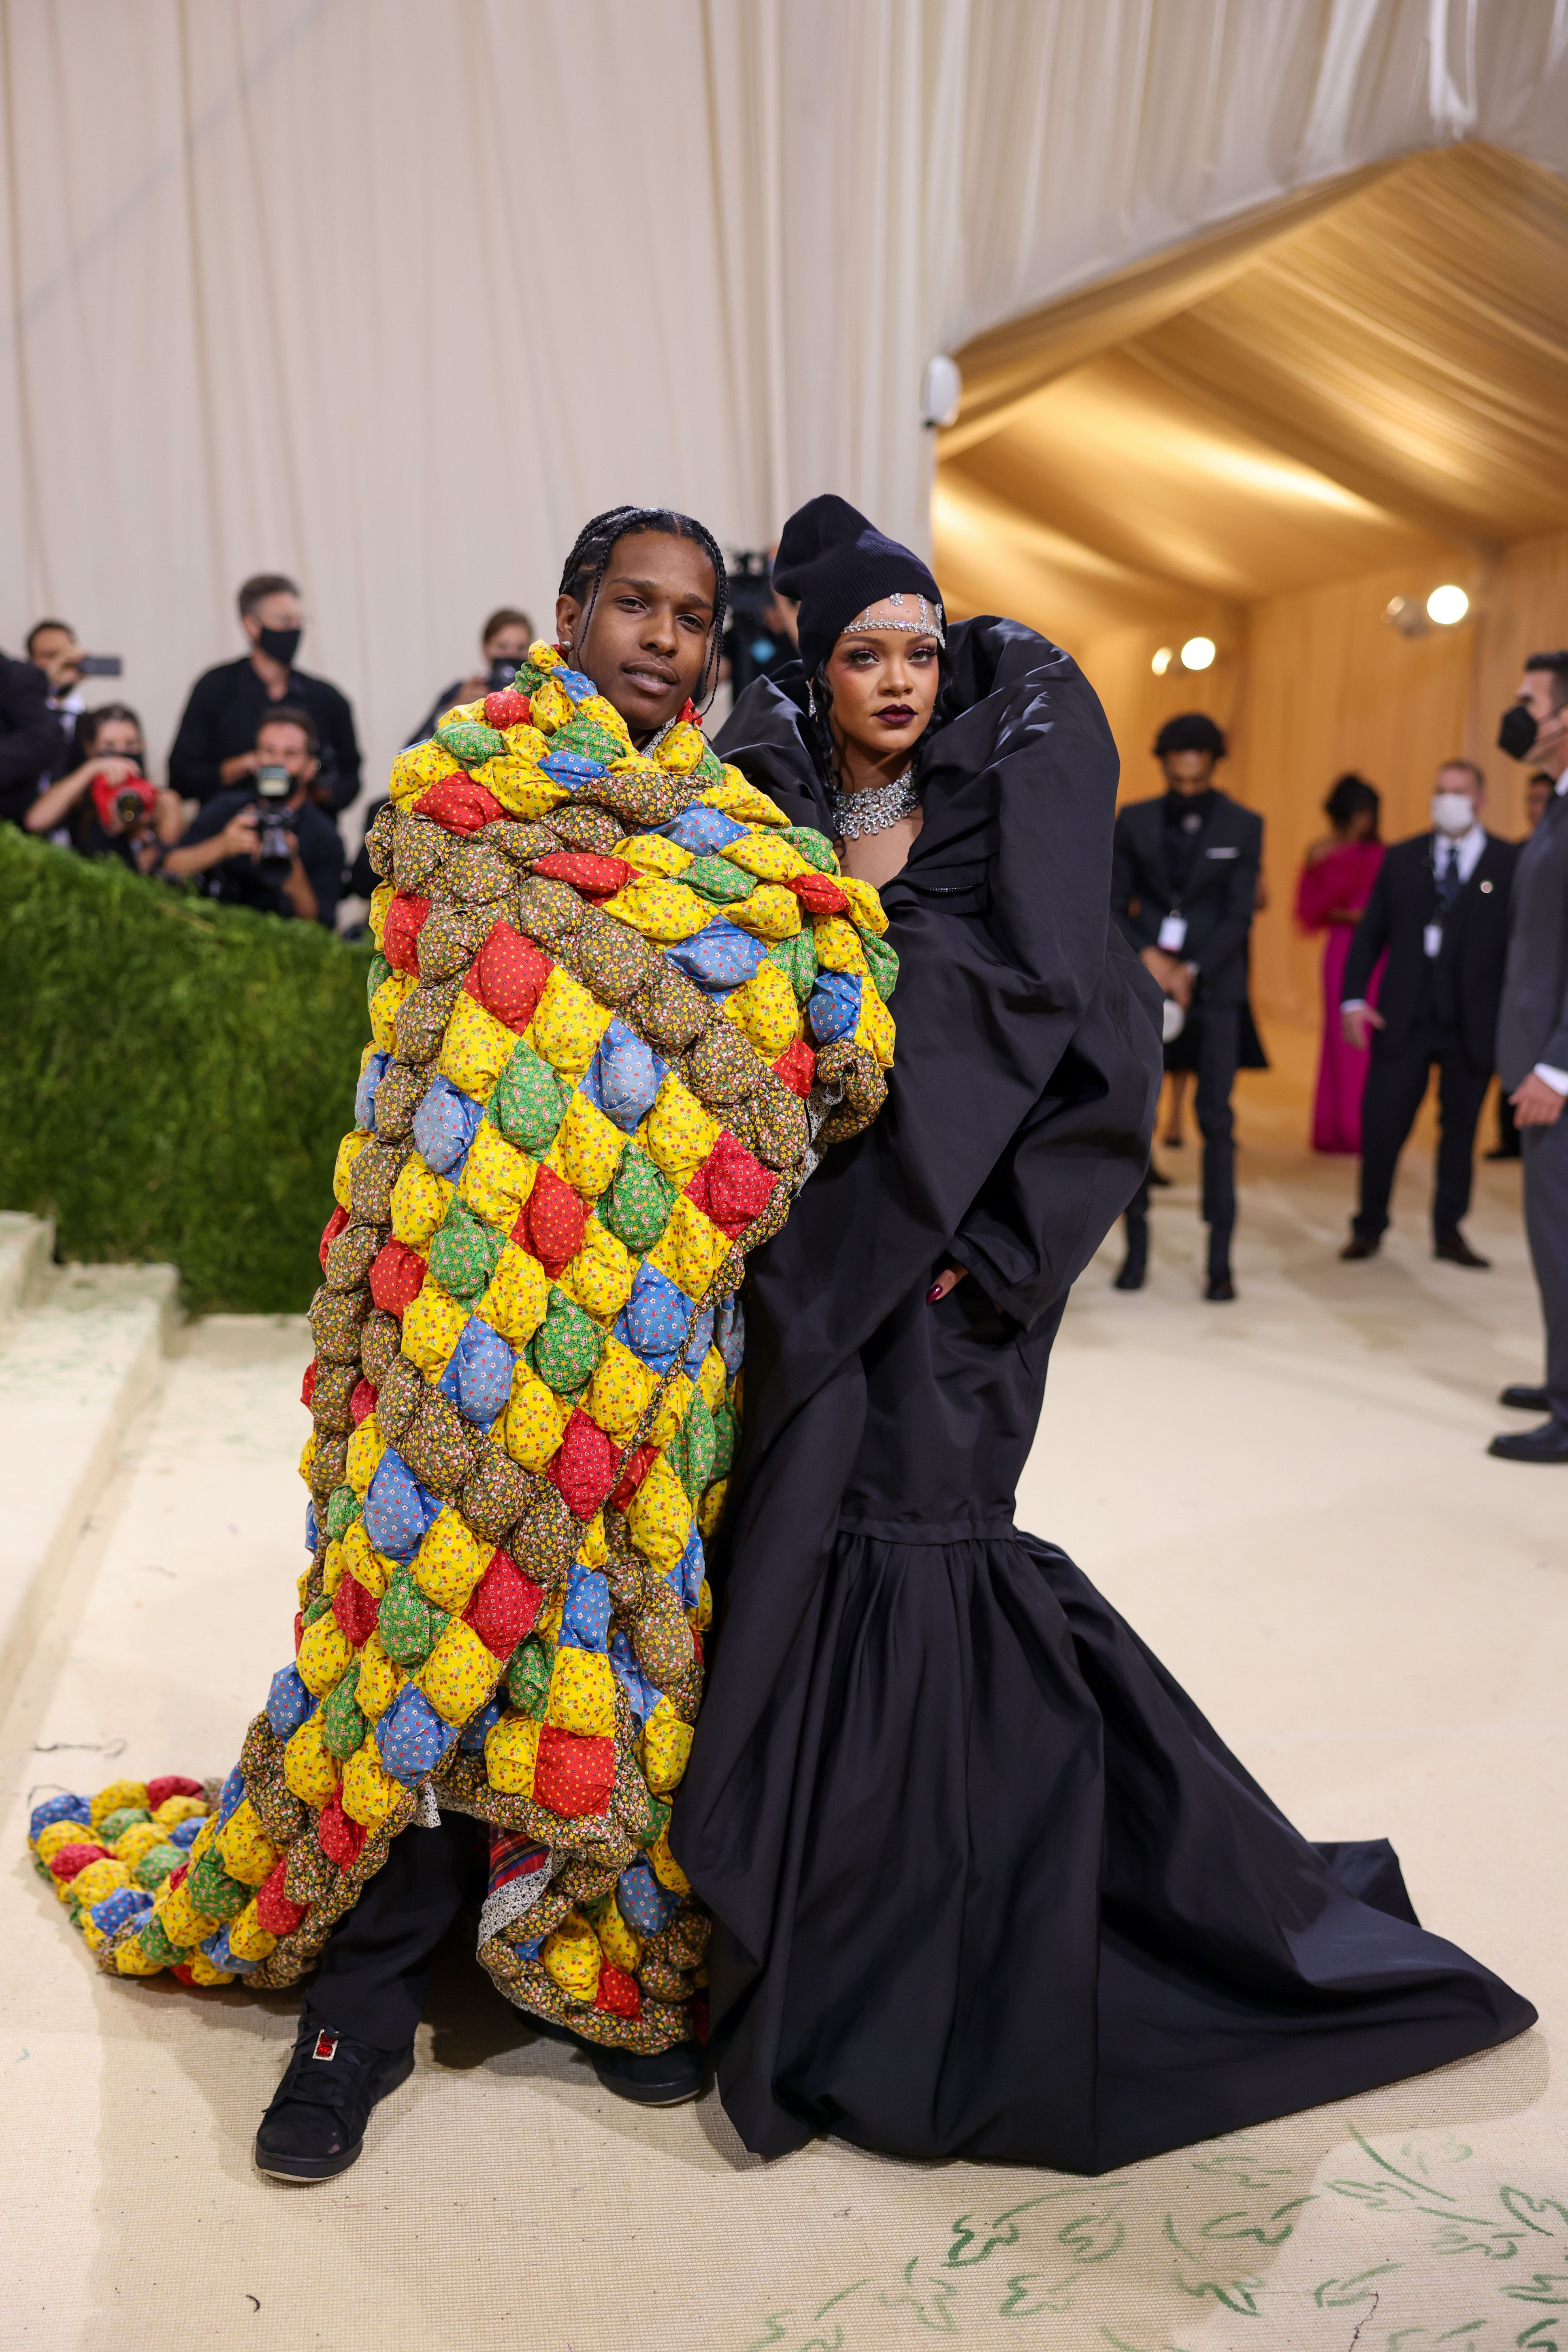 Rihanna Just Won the Met Gala Again, This Time With A Bishop's Hat